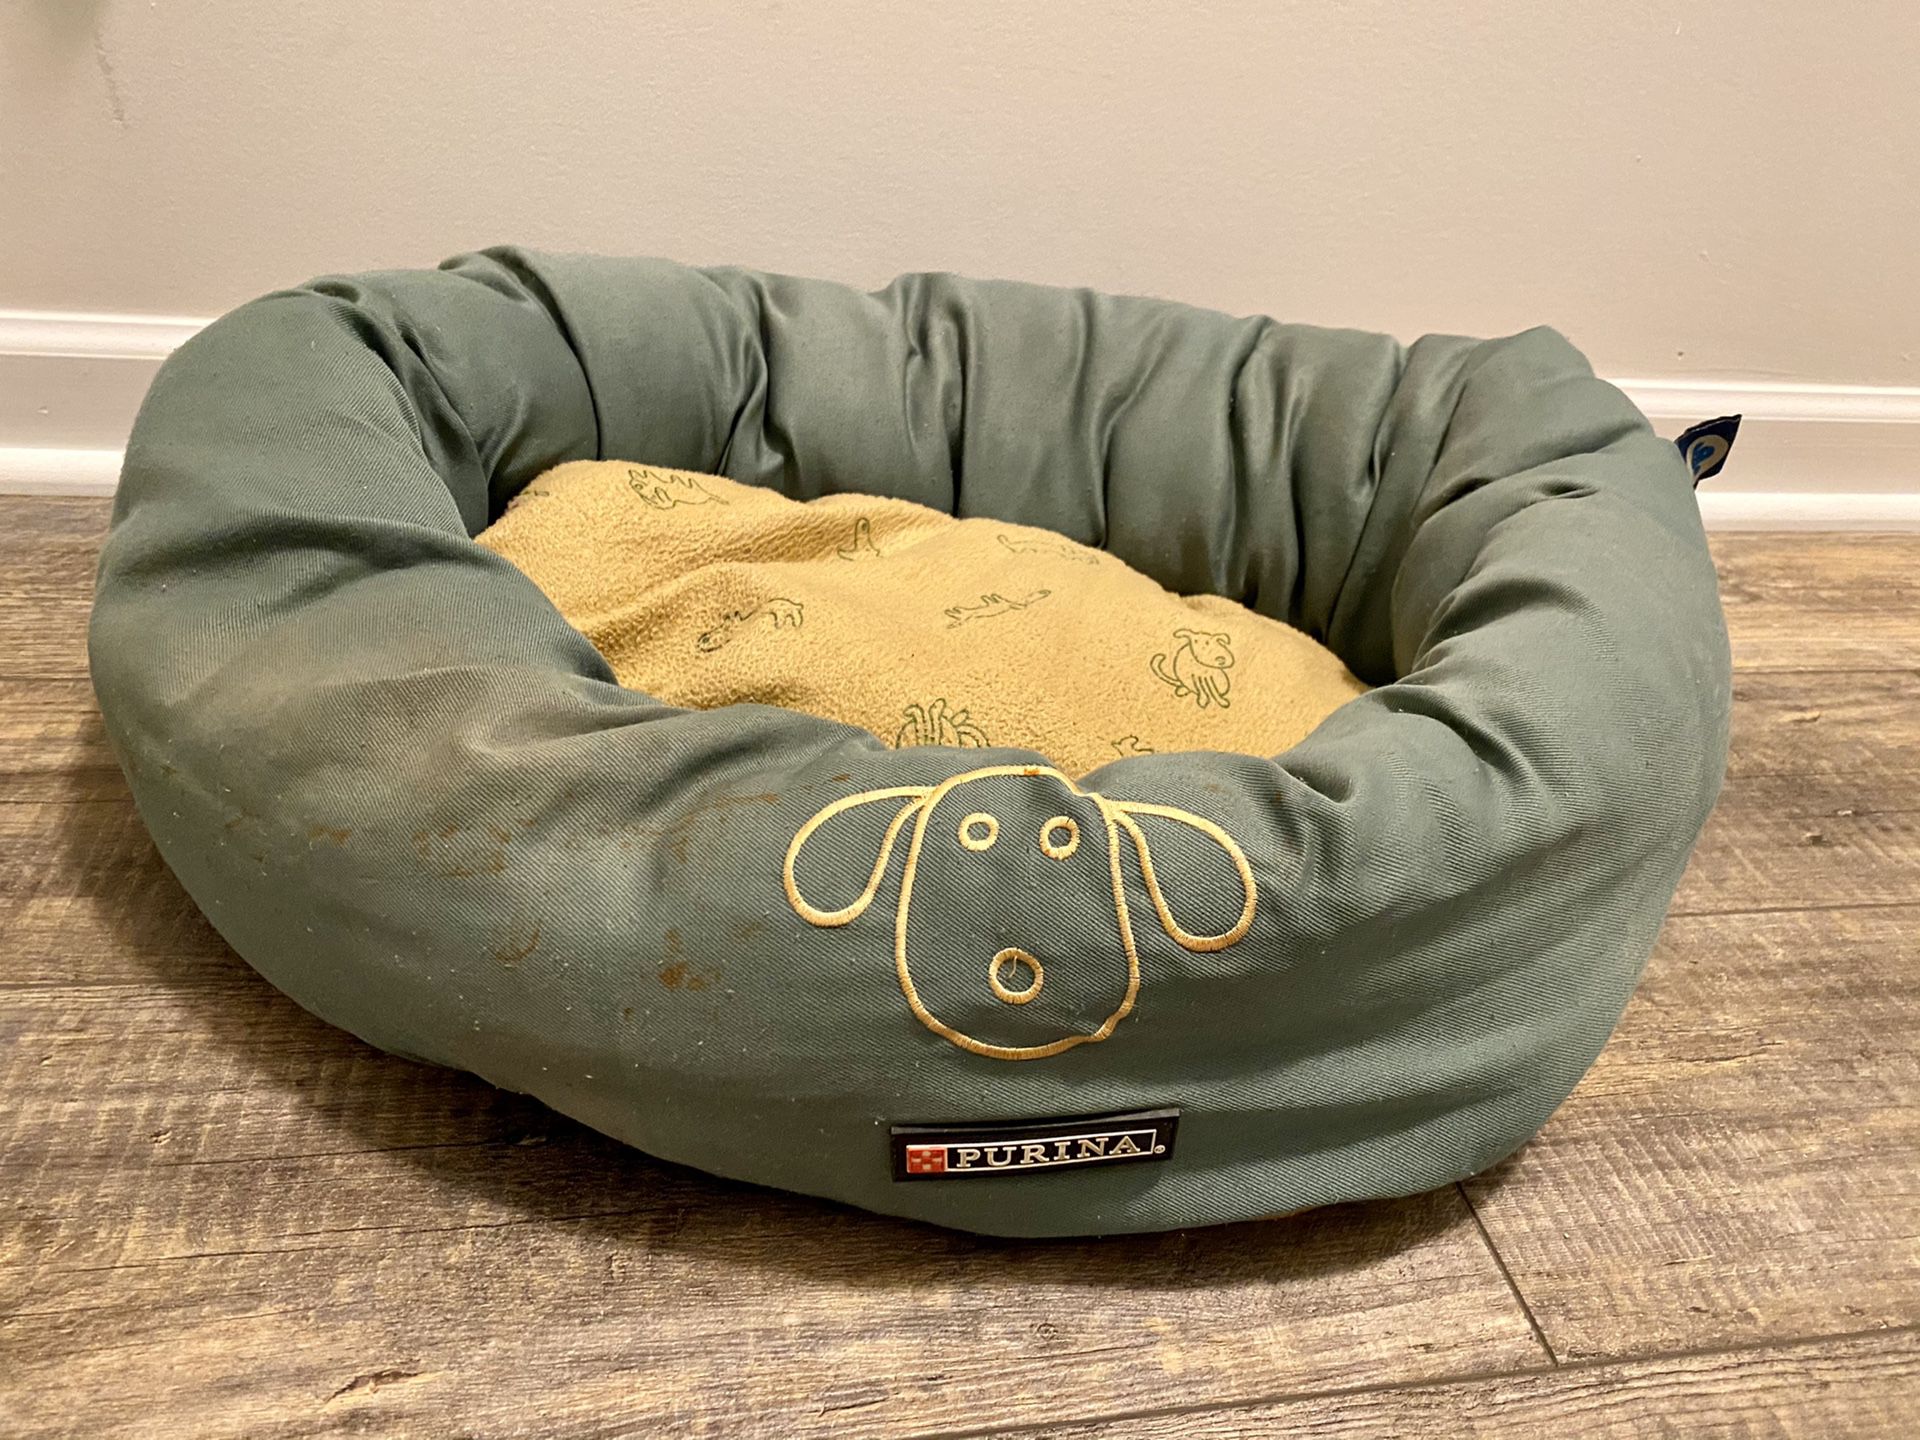 Small dog bed super warm and comfy!